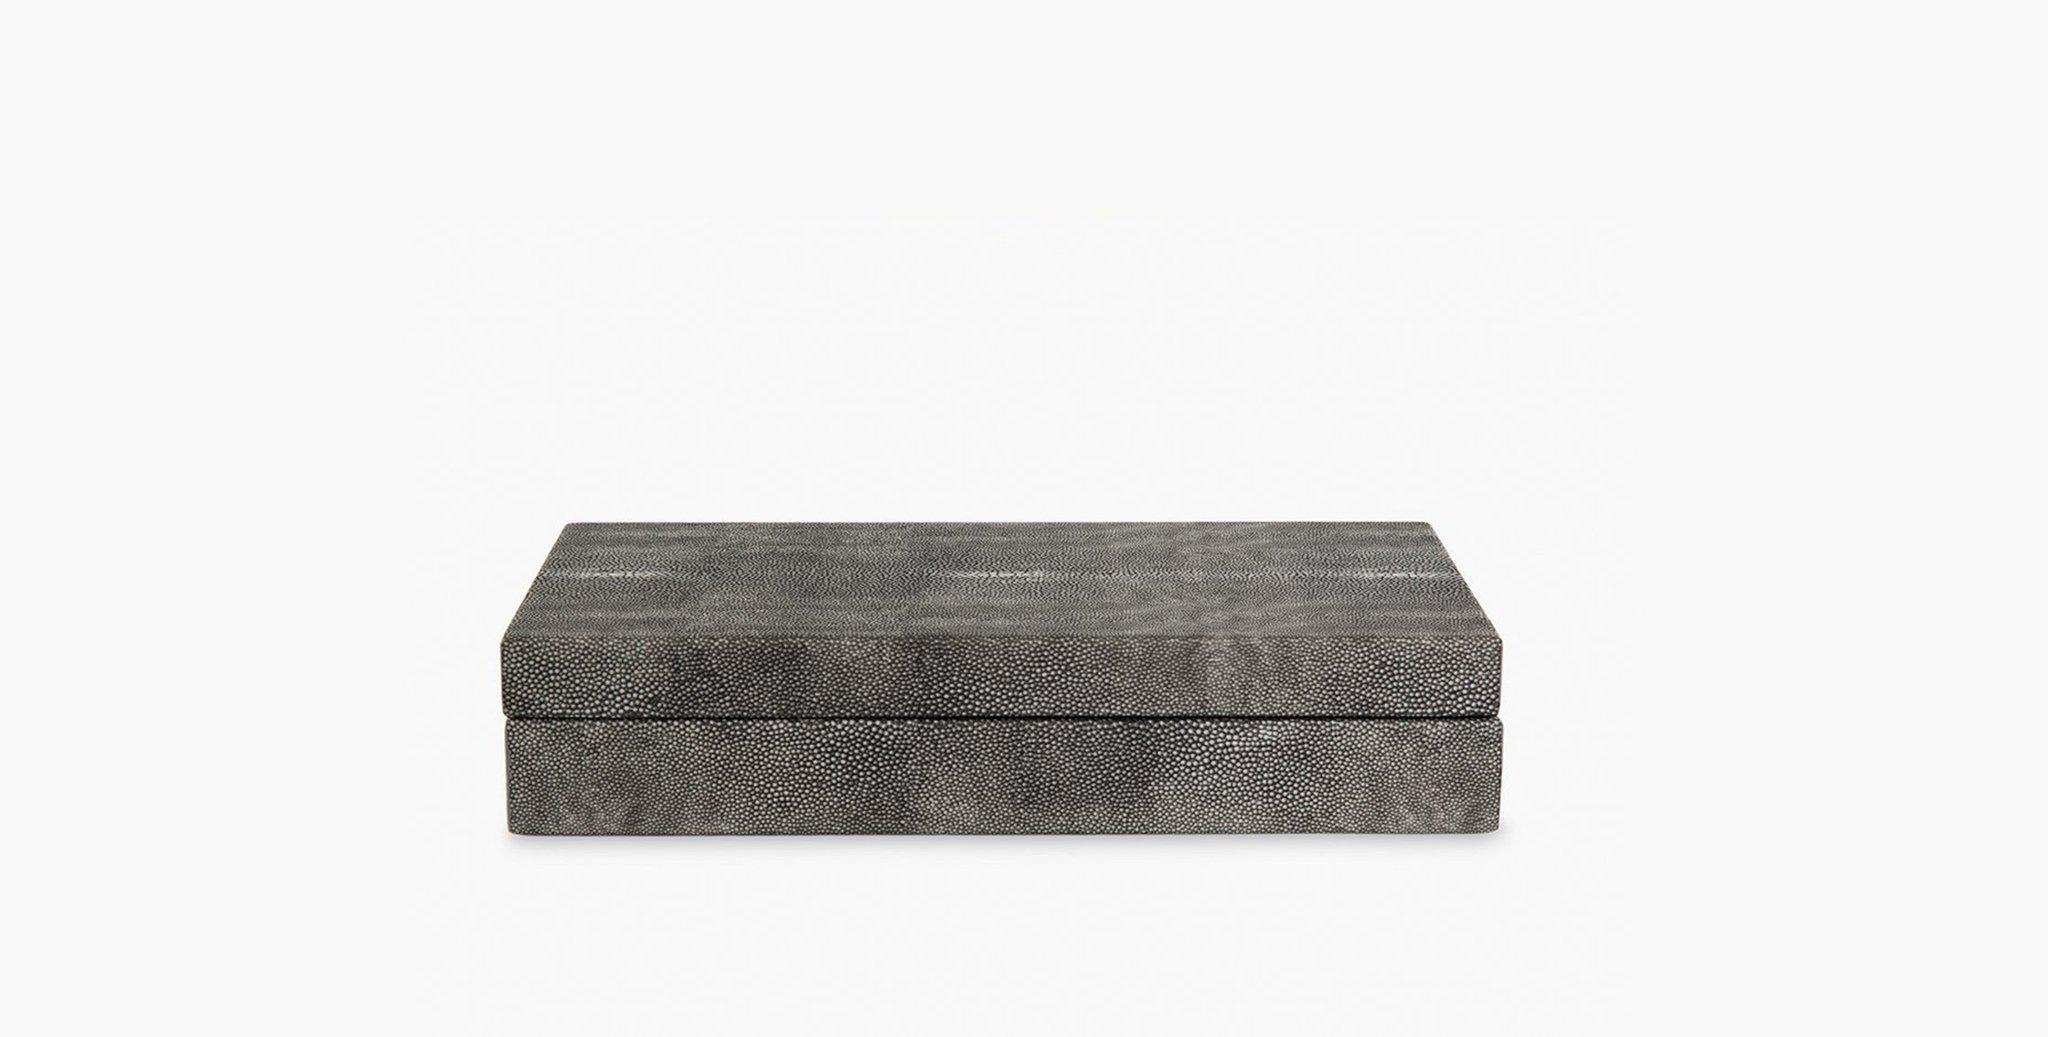 Our Delmar Boxes are wrapped in a striking gray/grey Shagreen inspired leather. The distinct pebbled surface adds an elegant textural accent to your designs and the perfect place for discreet organization. Available in 2 sizes, perfect for